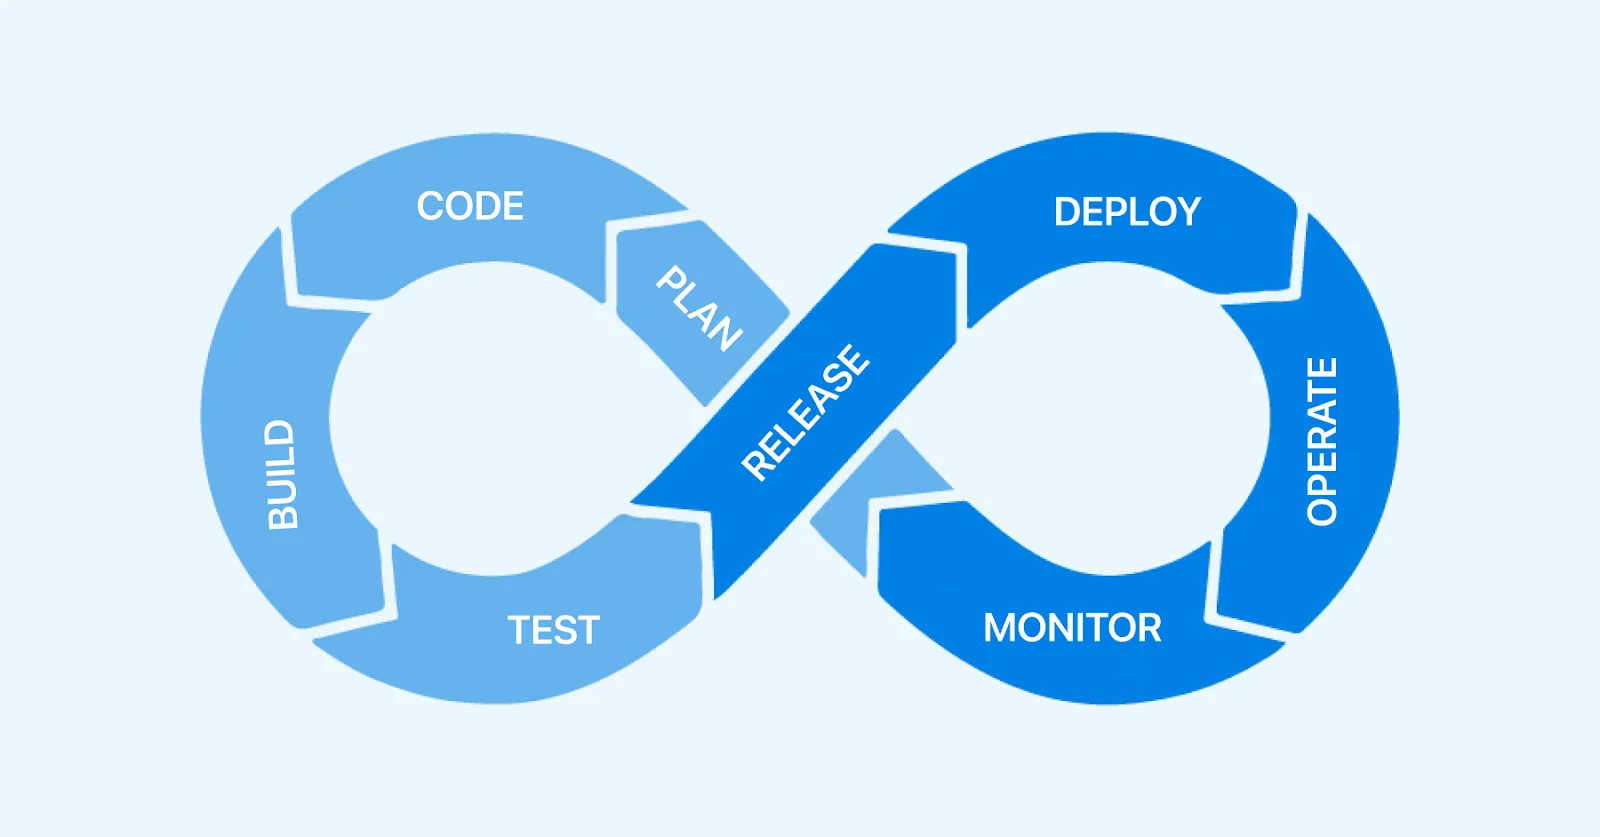 DevOps lifecycle is illustrated below as a perpetual and interconnected cycle